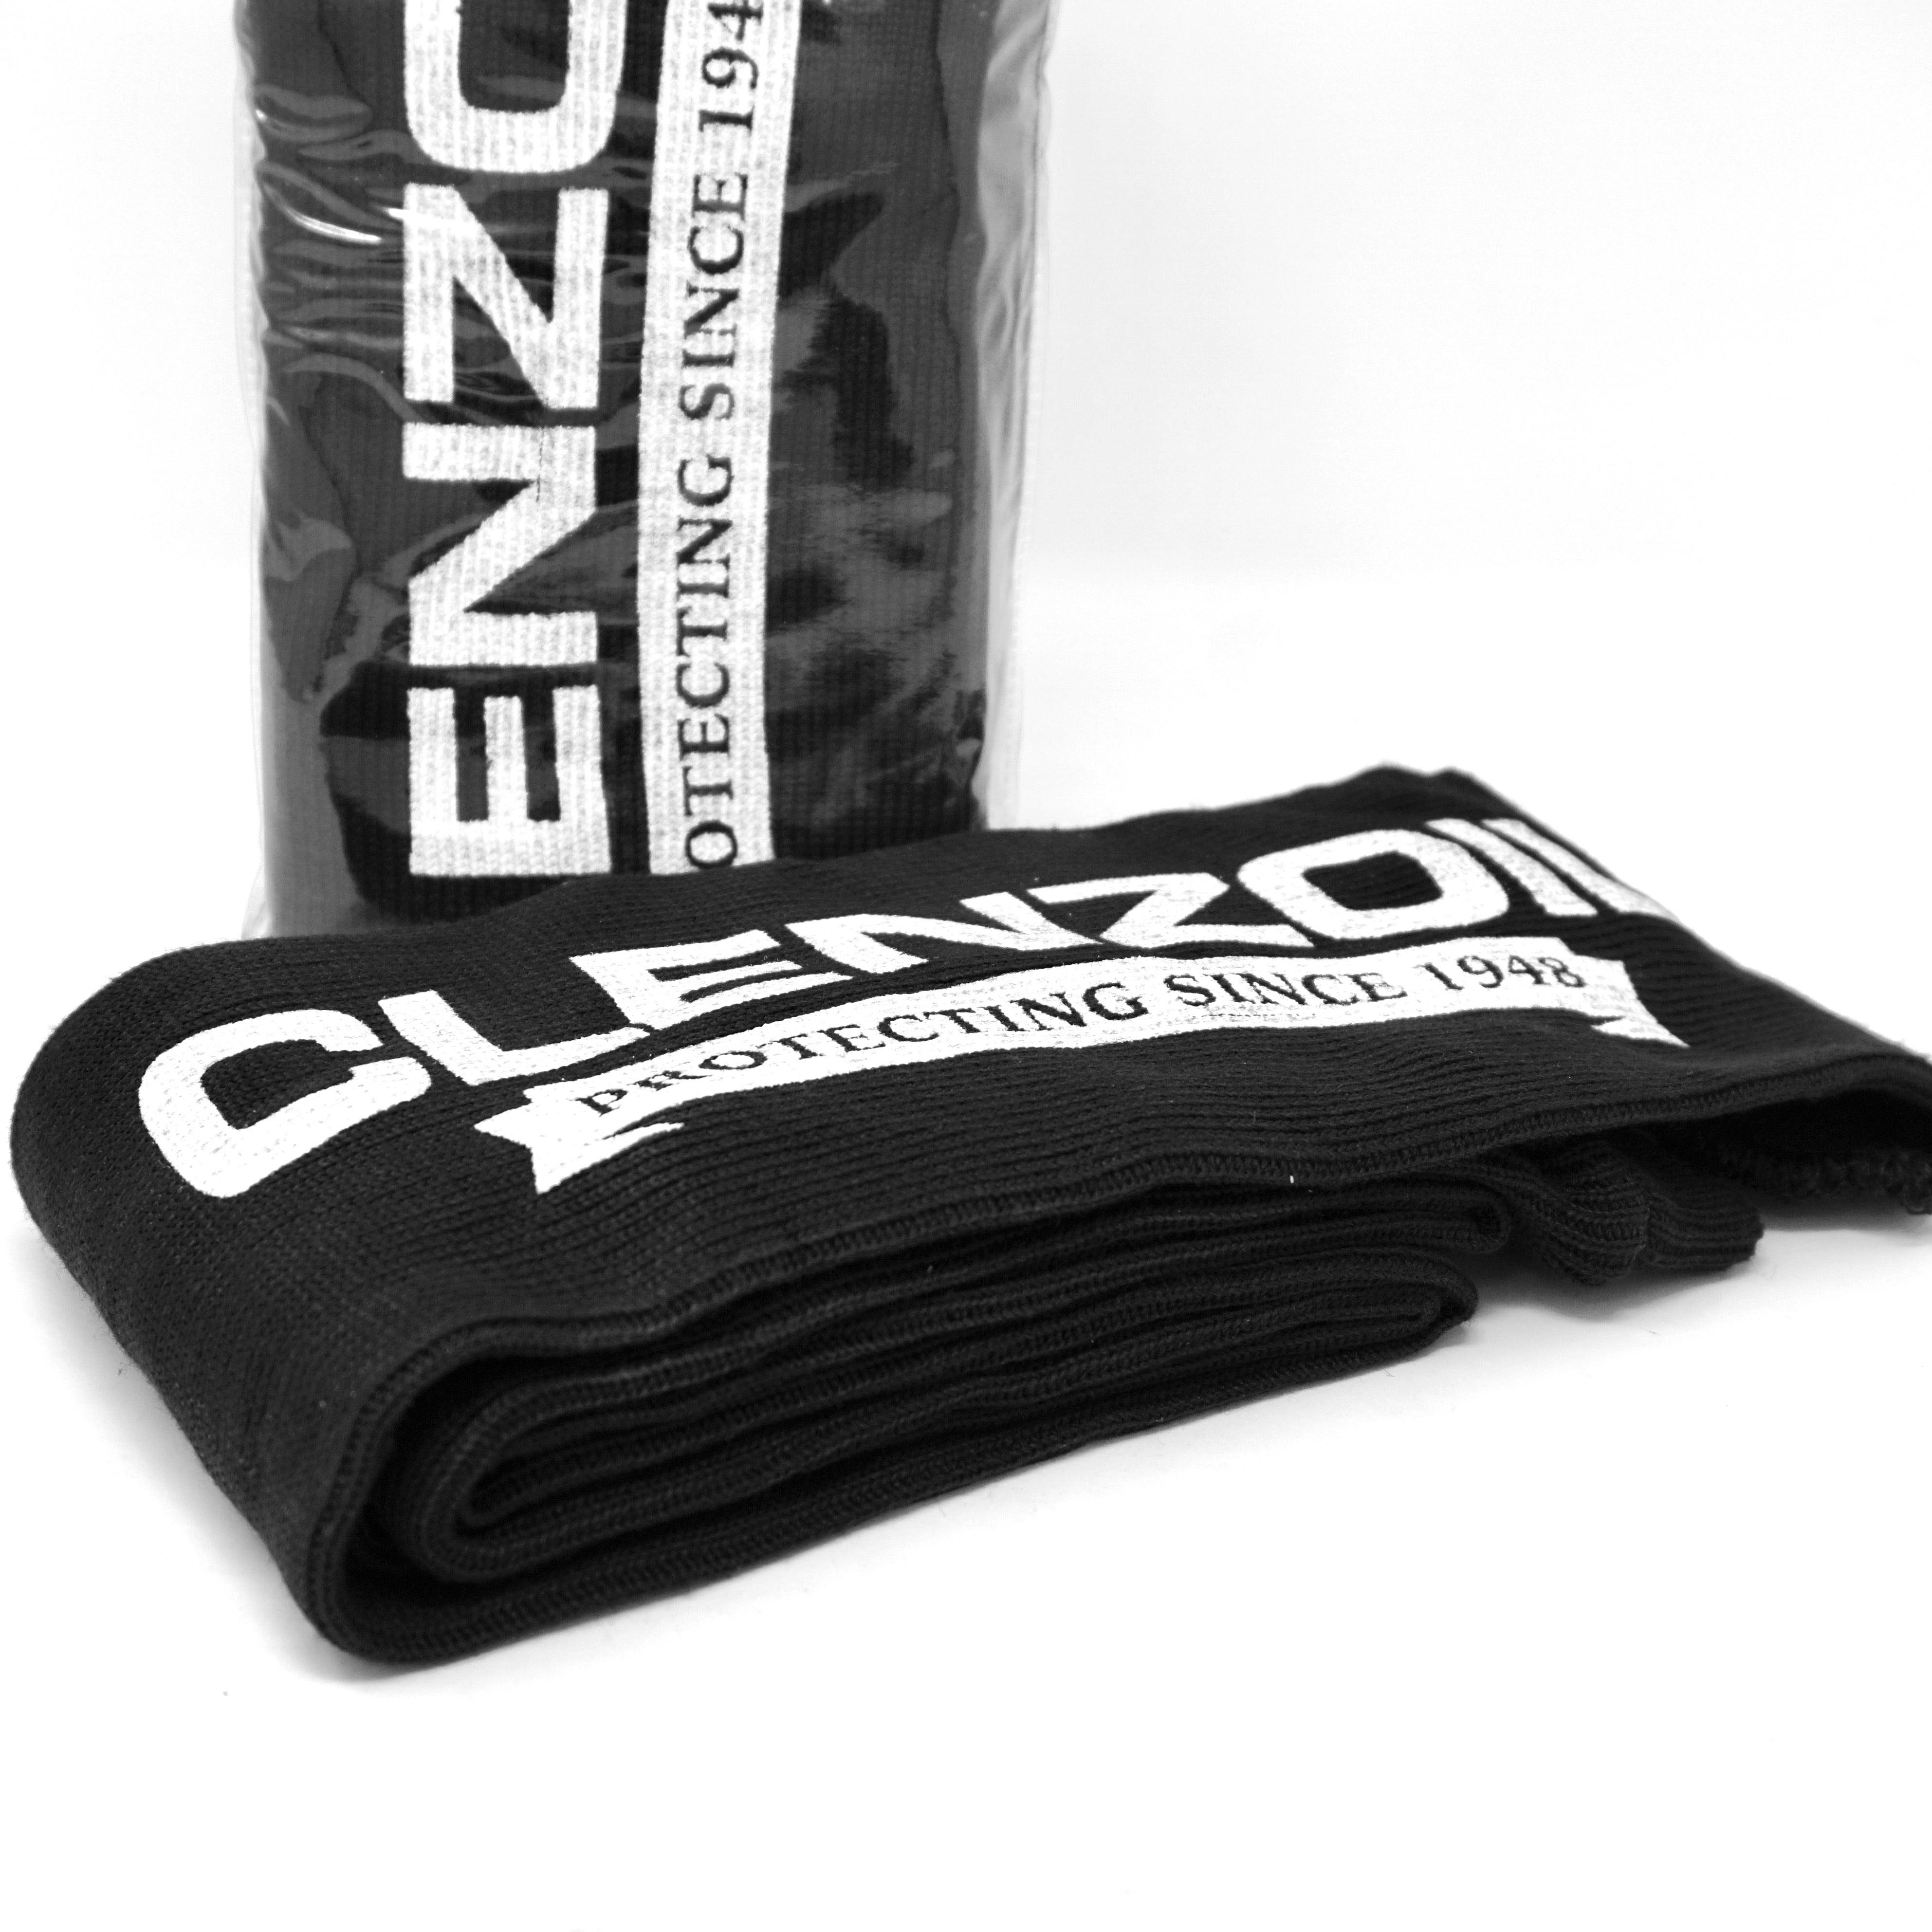 Firearm Protective Sleeve - Clenzoil Unlimited